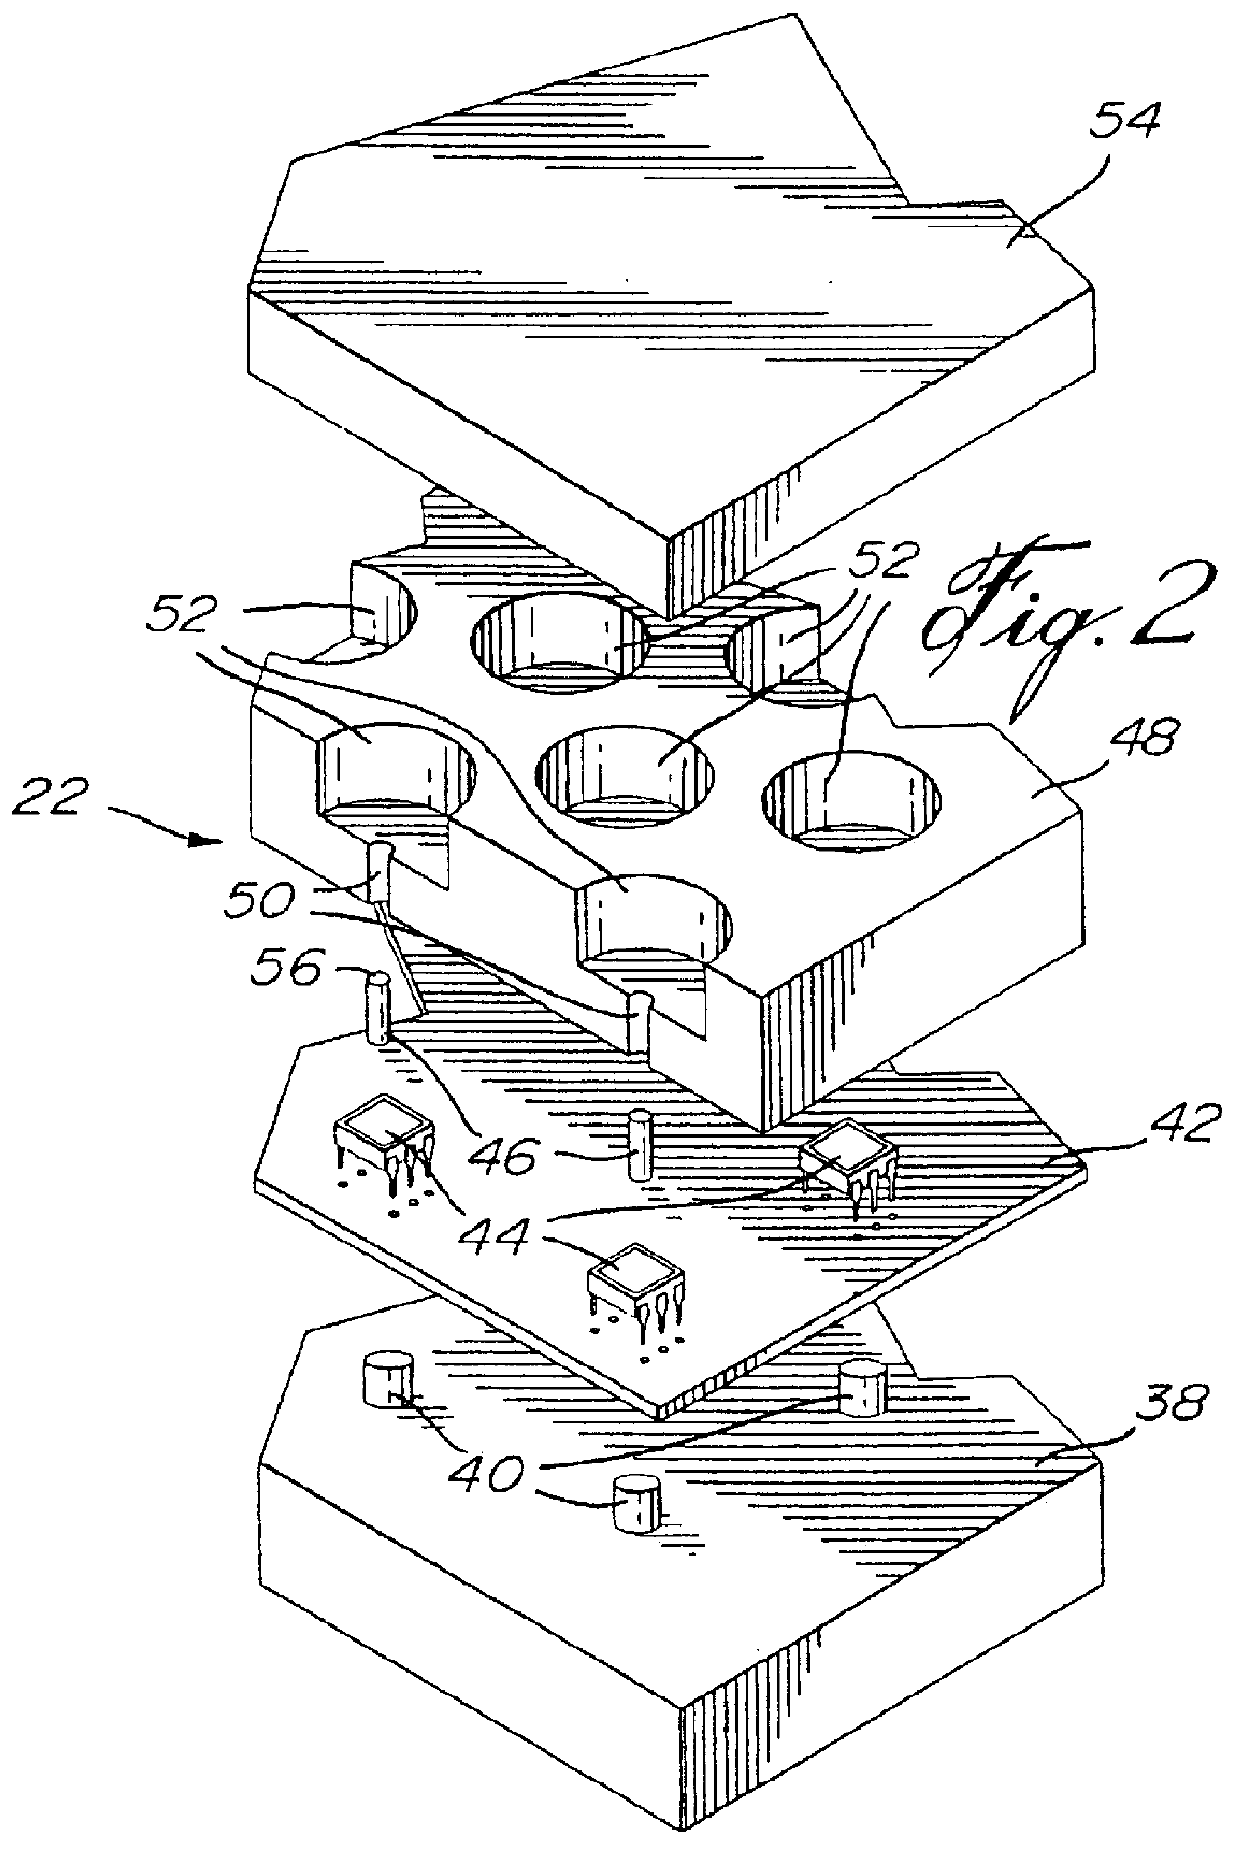 Apparatus and method for converting an optical image of an object into a digital representation